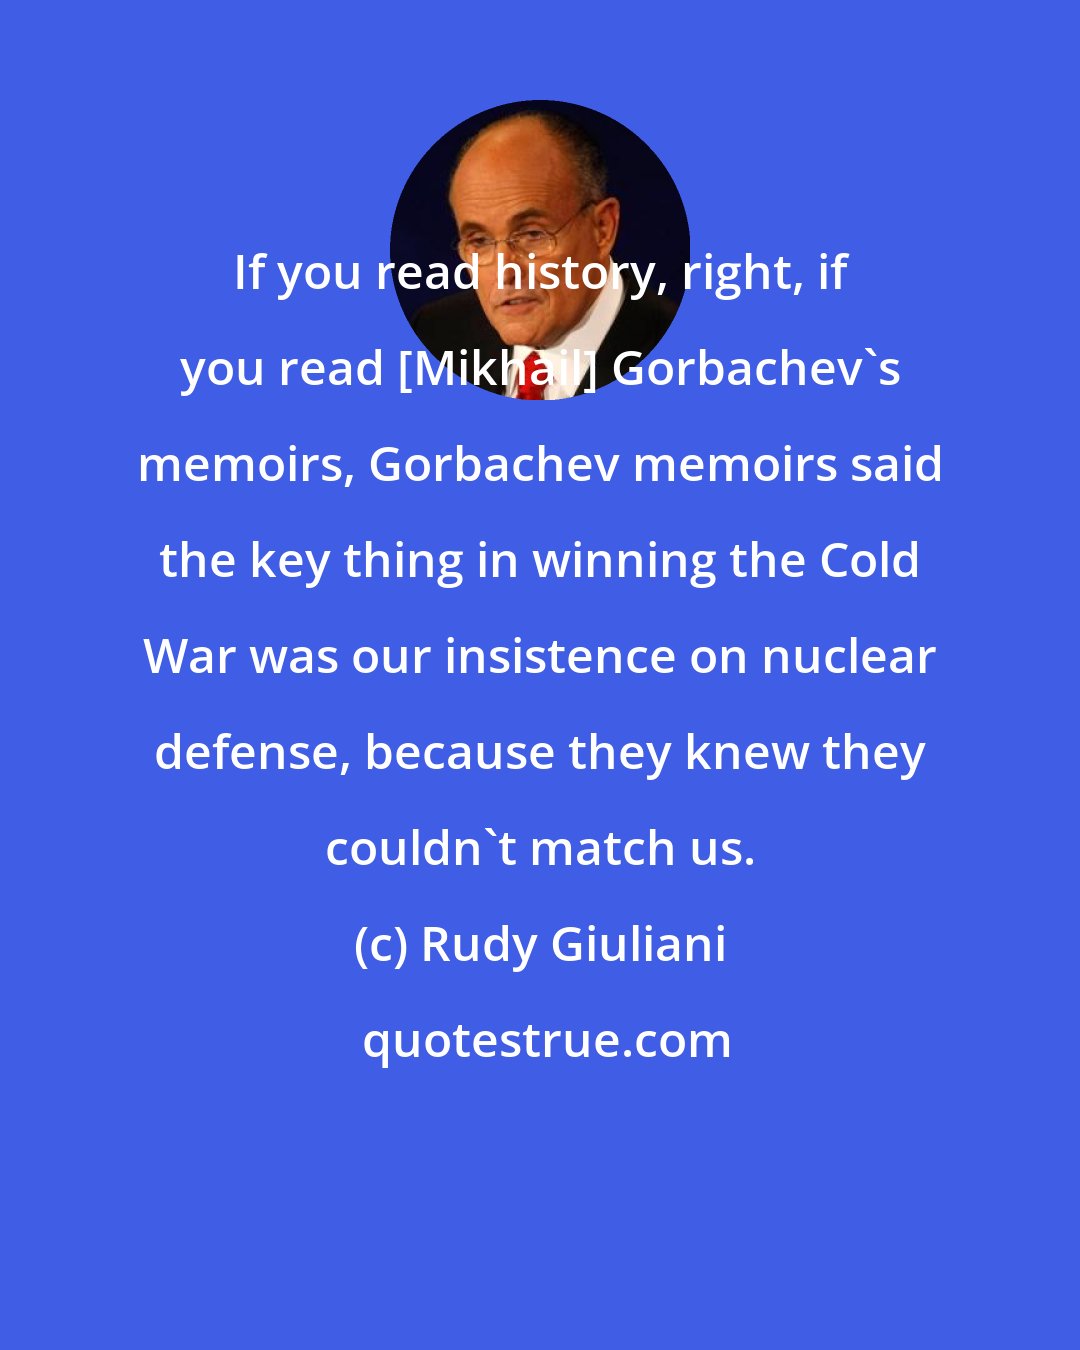 Rudy Giuliani: If you read history, right, if you read [Mikhail] Gorbachev's memoirs, Gorbachev memoirs said the key thing in winning the Cold War was our insistence on nuclear defense, because they knew they couldn't match us.